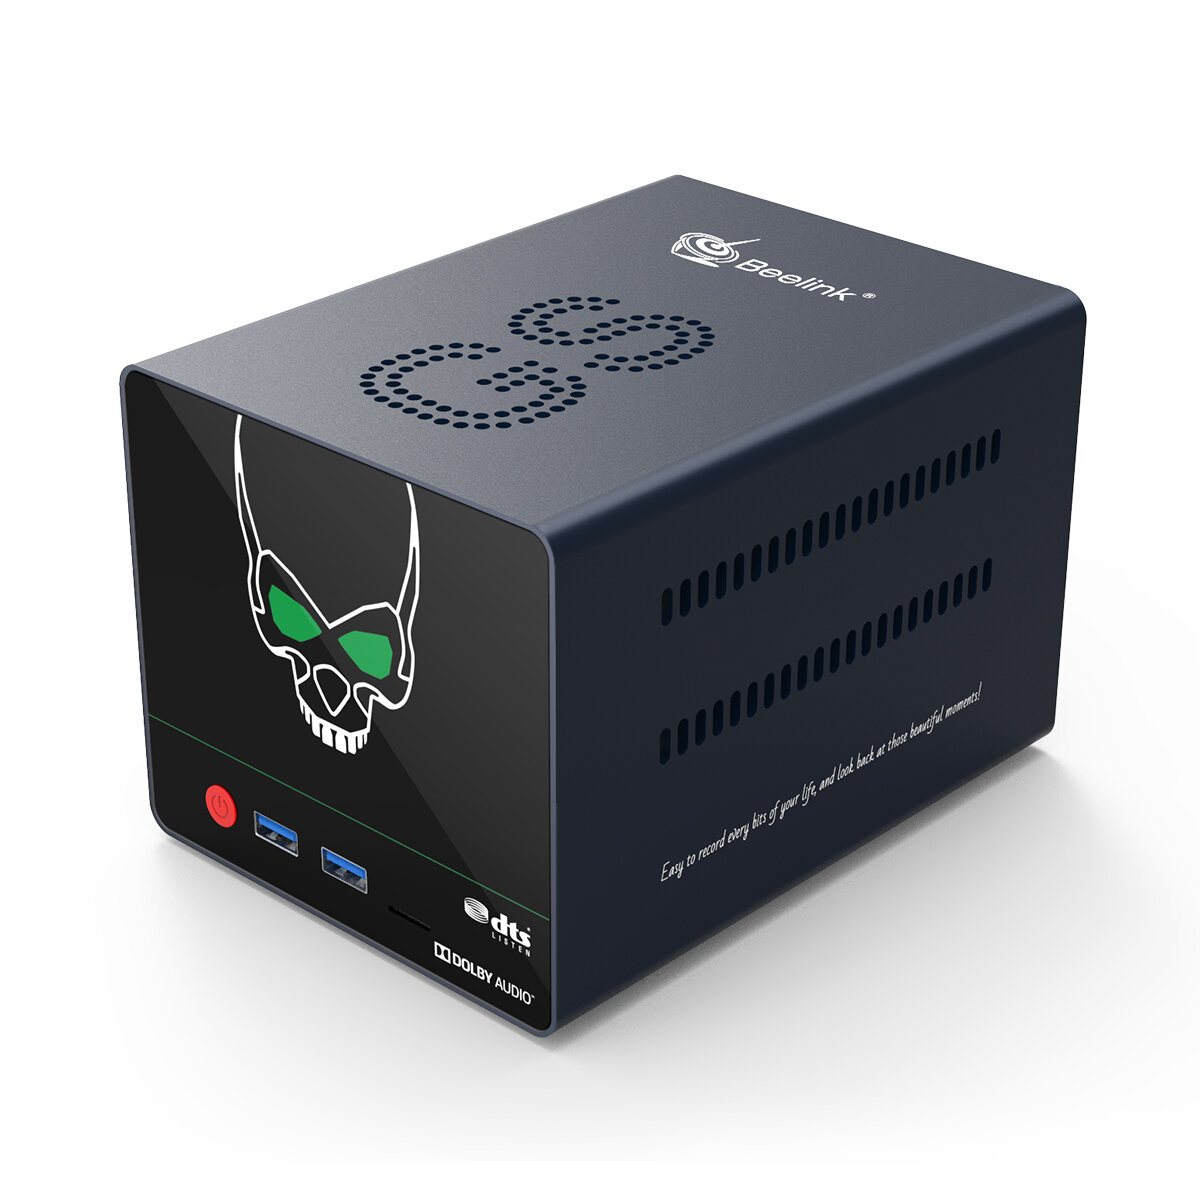 

Beelink GS-King X Amlogic S922X-H 4 ГБ DDR4 64GB eMMC 5.8G WIFI 1000M LAN BT4.1 4K Dolby DTS Android 9.0 ТВ Коробка HDD